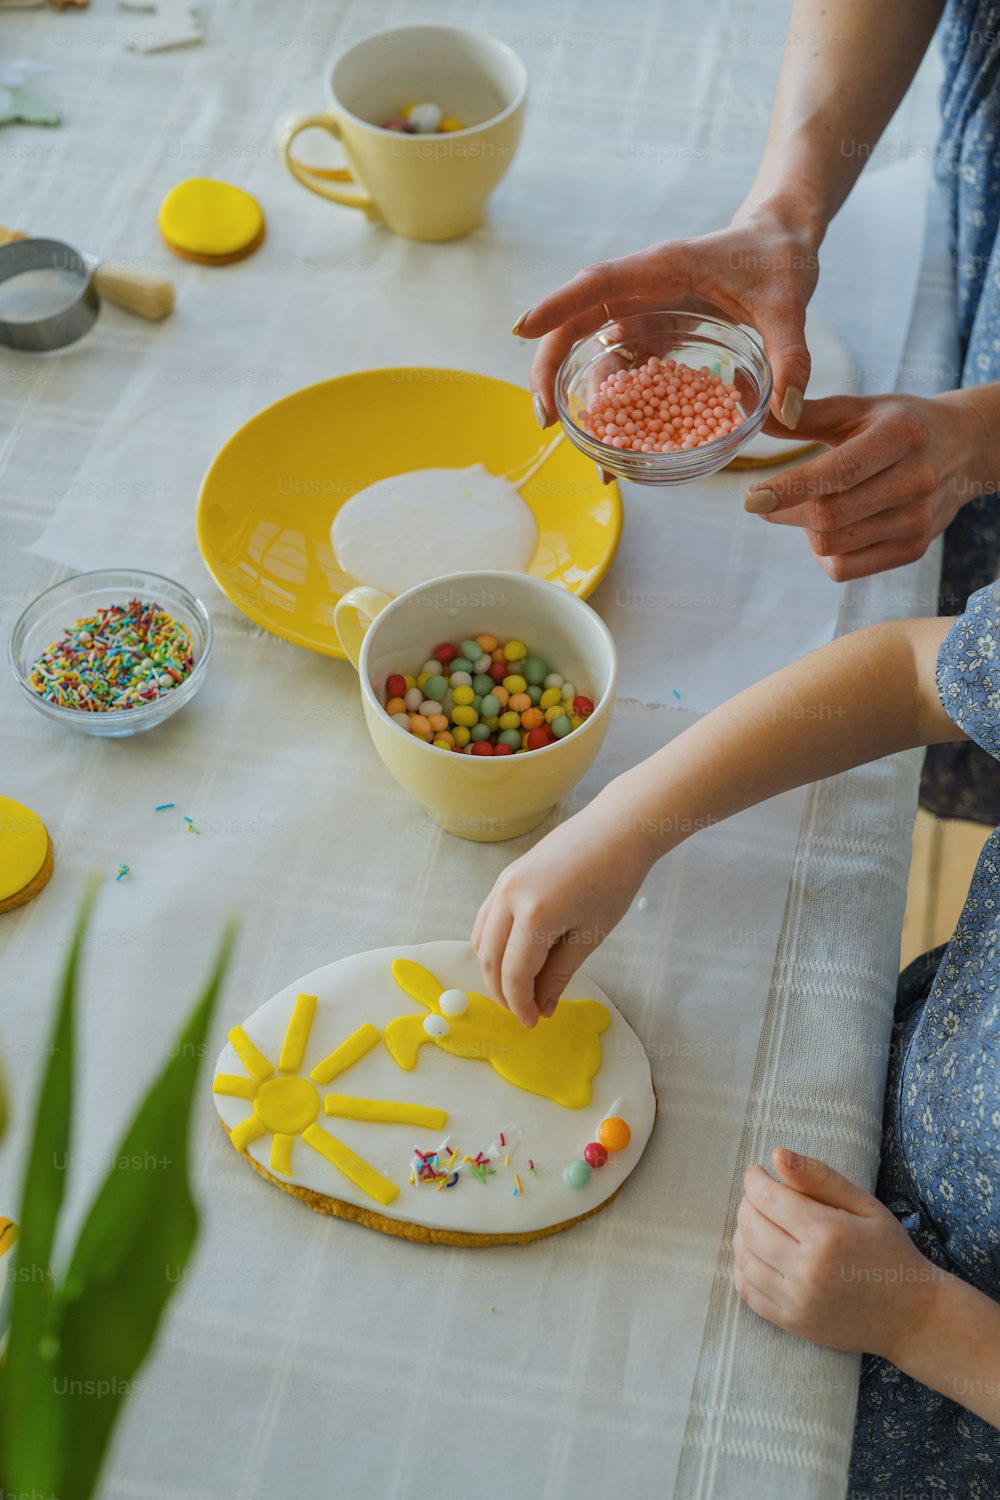 a woman is decorating a cake with yellow icing